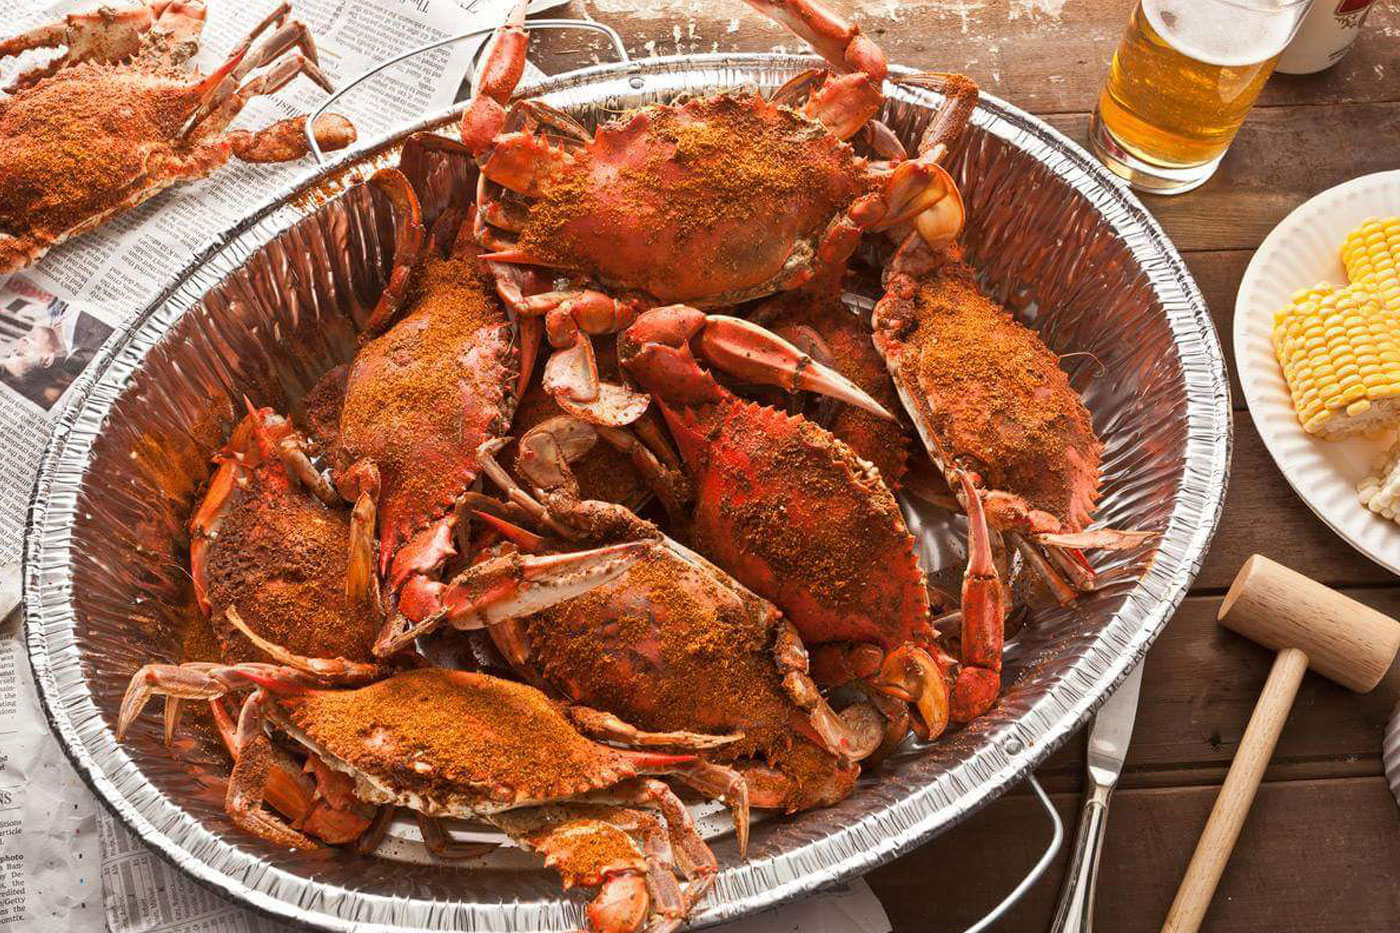 How to Boil or Steam Crab | Best Ways to Cook Crab | Cameron's Seafood